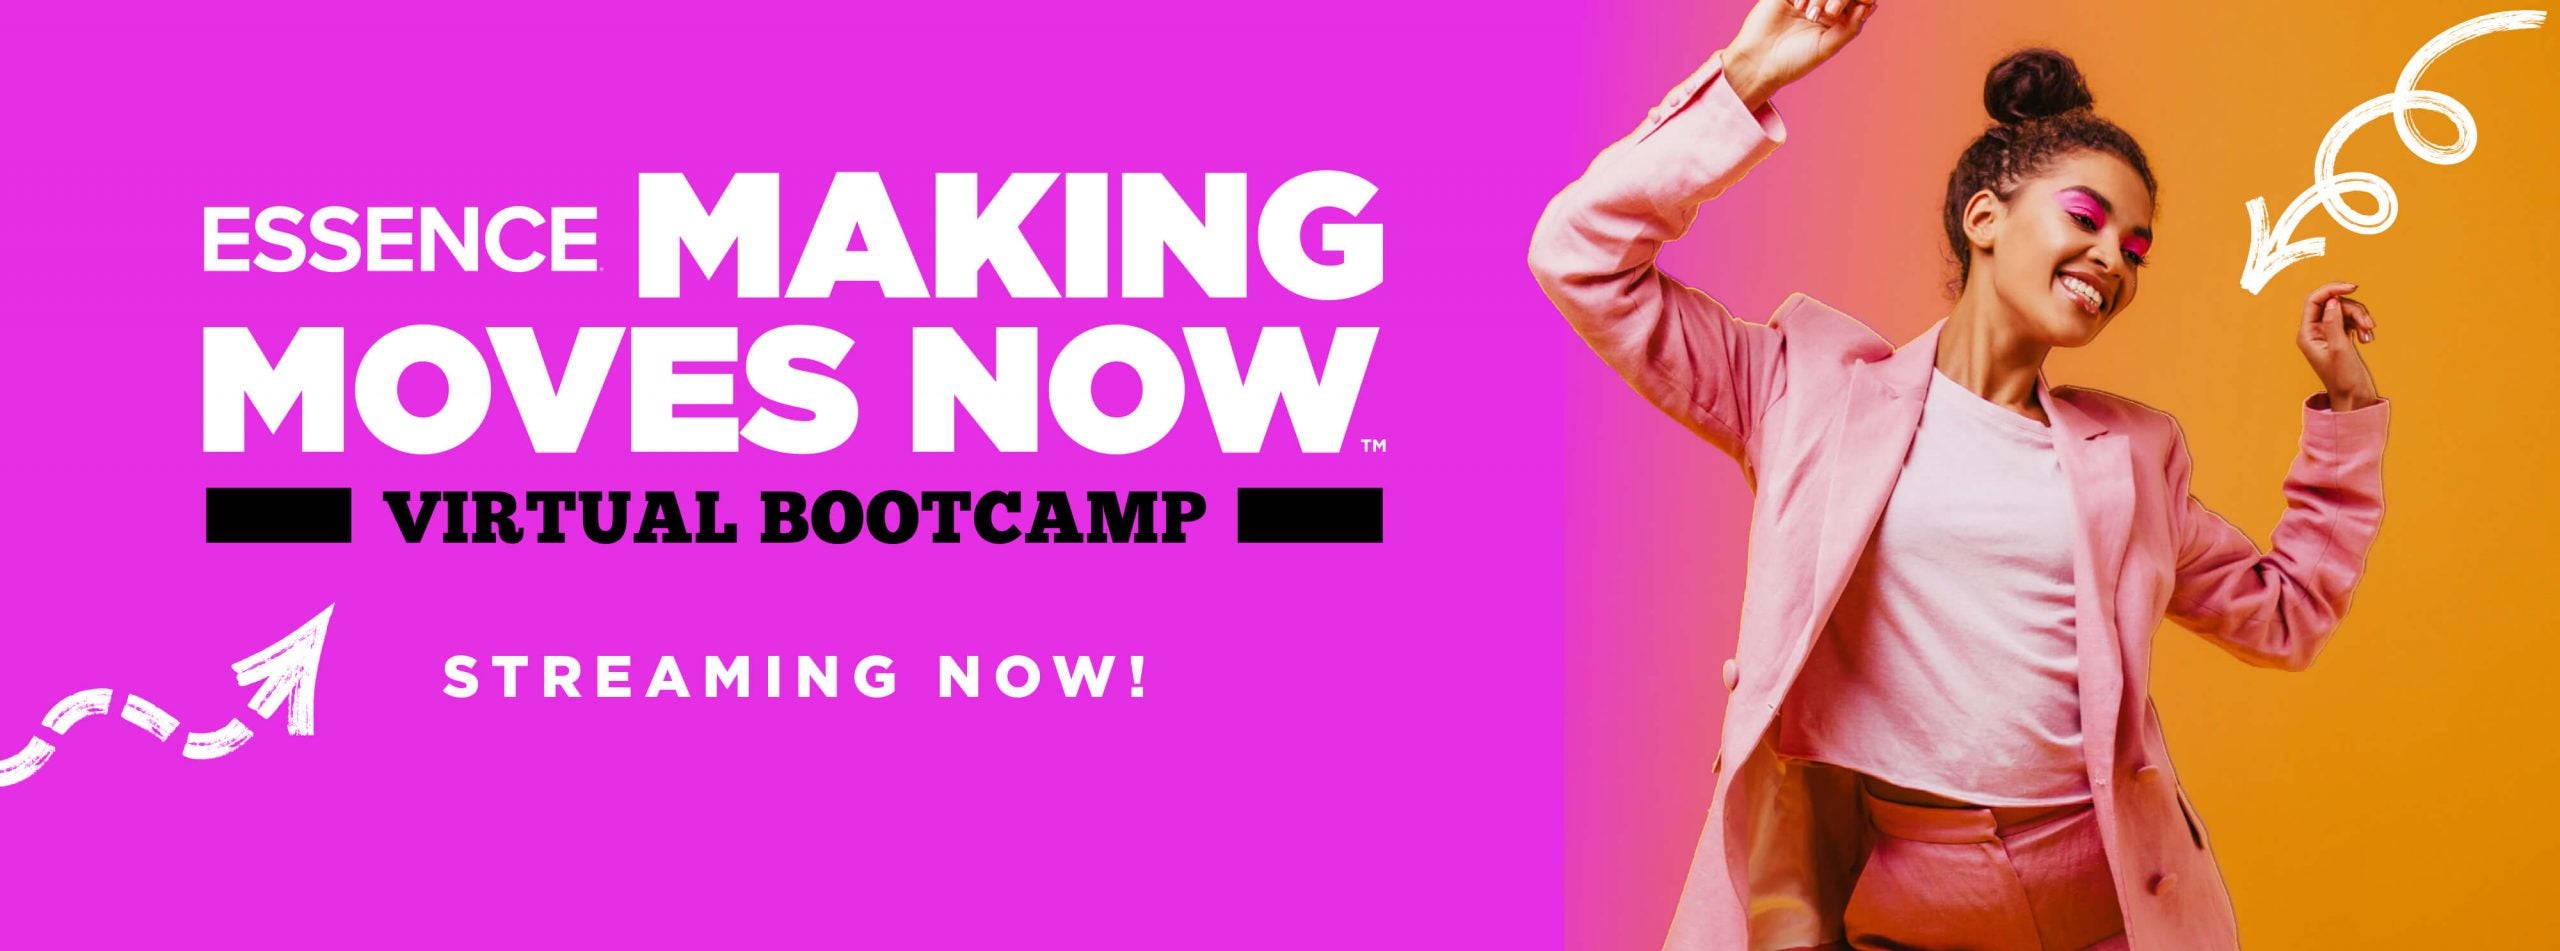 Essence Making Moves Now - Virtual Bootcamp Streaming Now